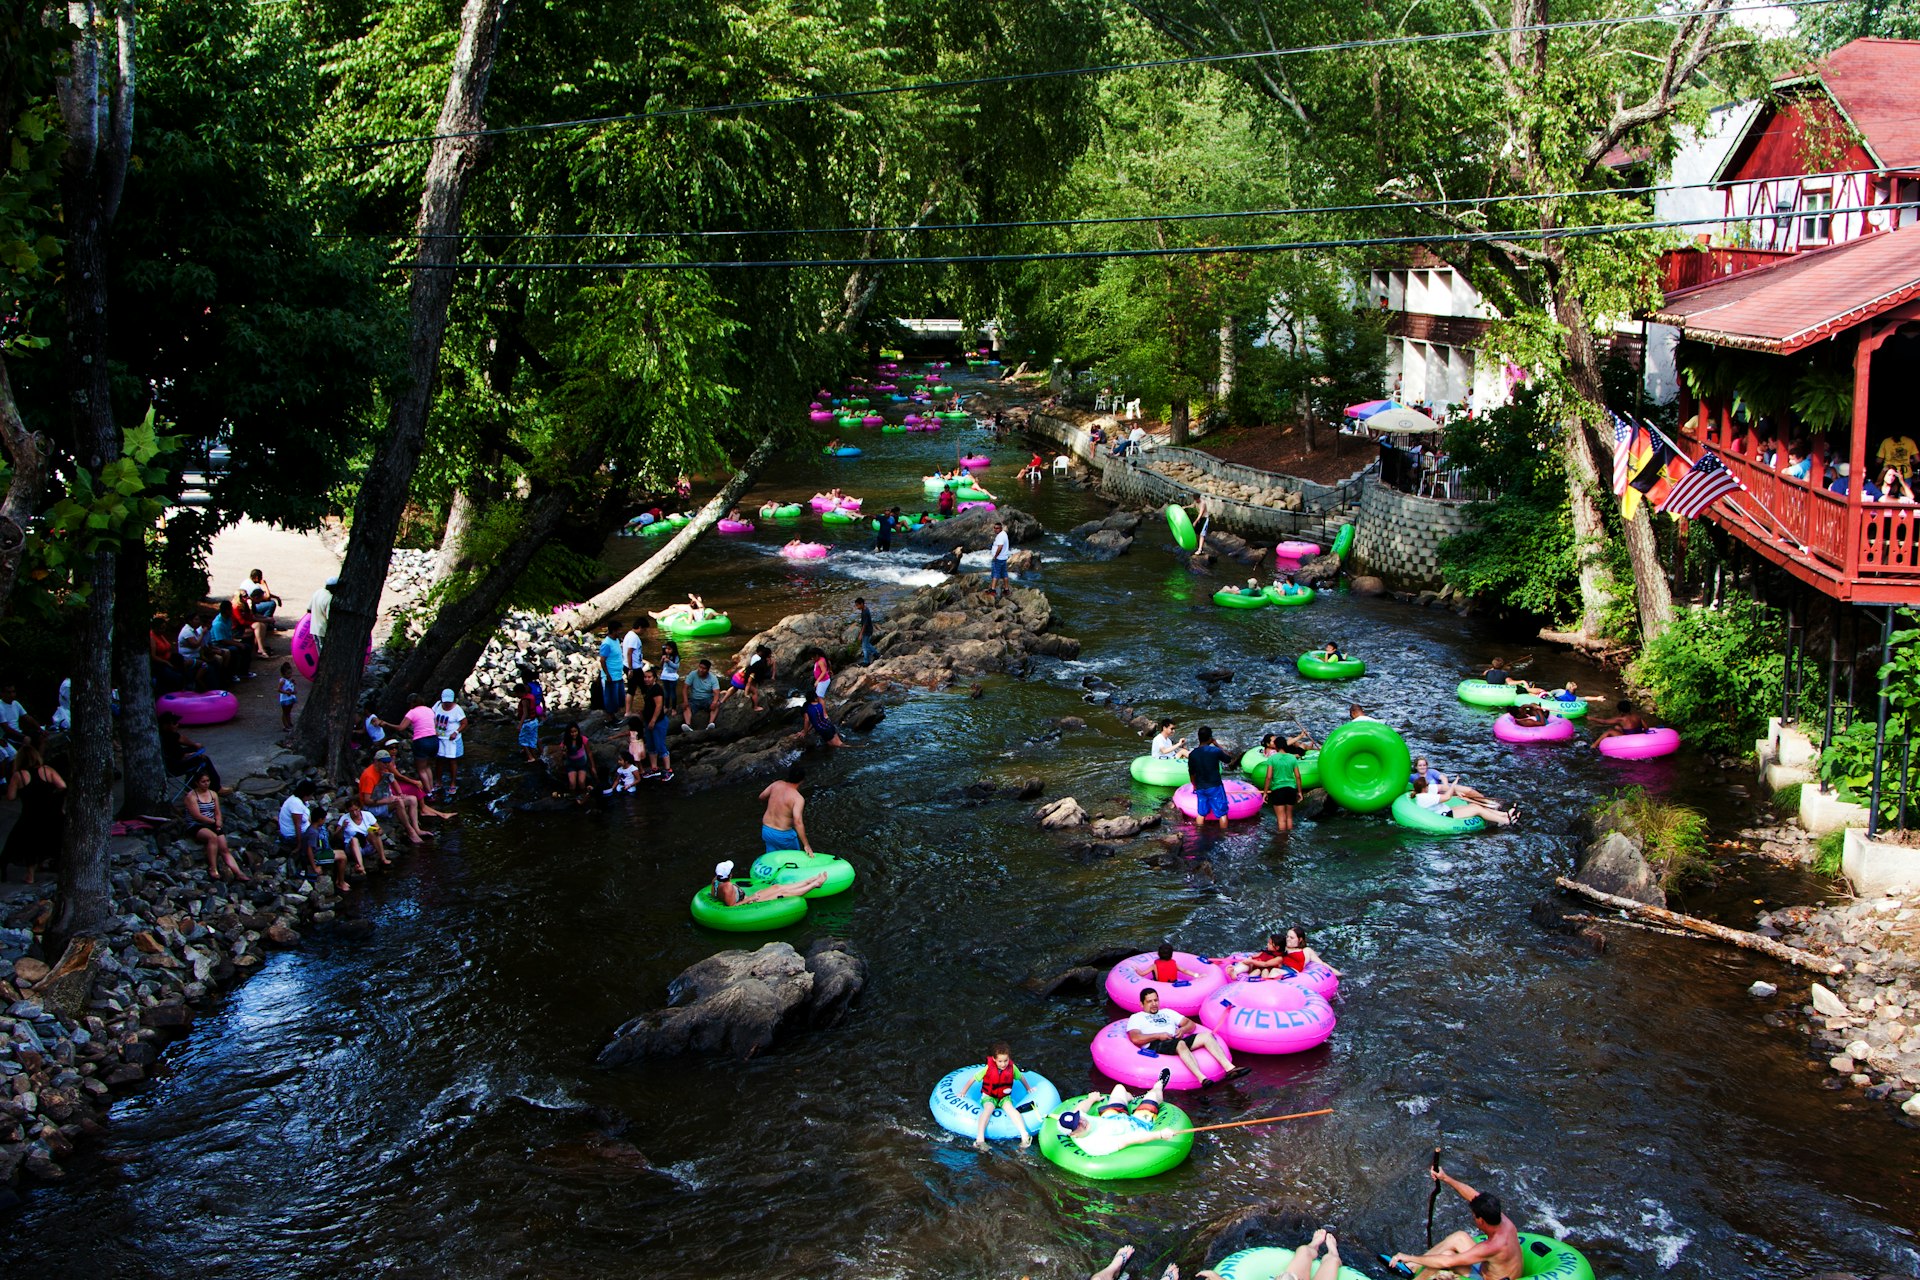 An overhead shot of a crowd of tubers in the waters of the Chattahoochee River, Helen, GA